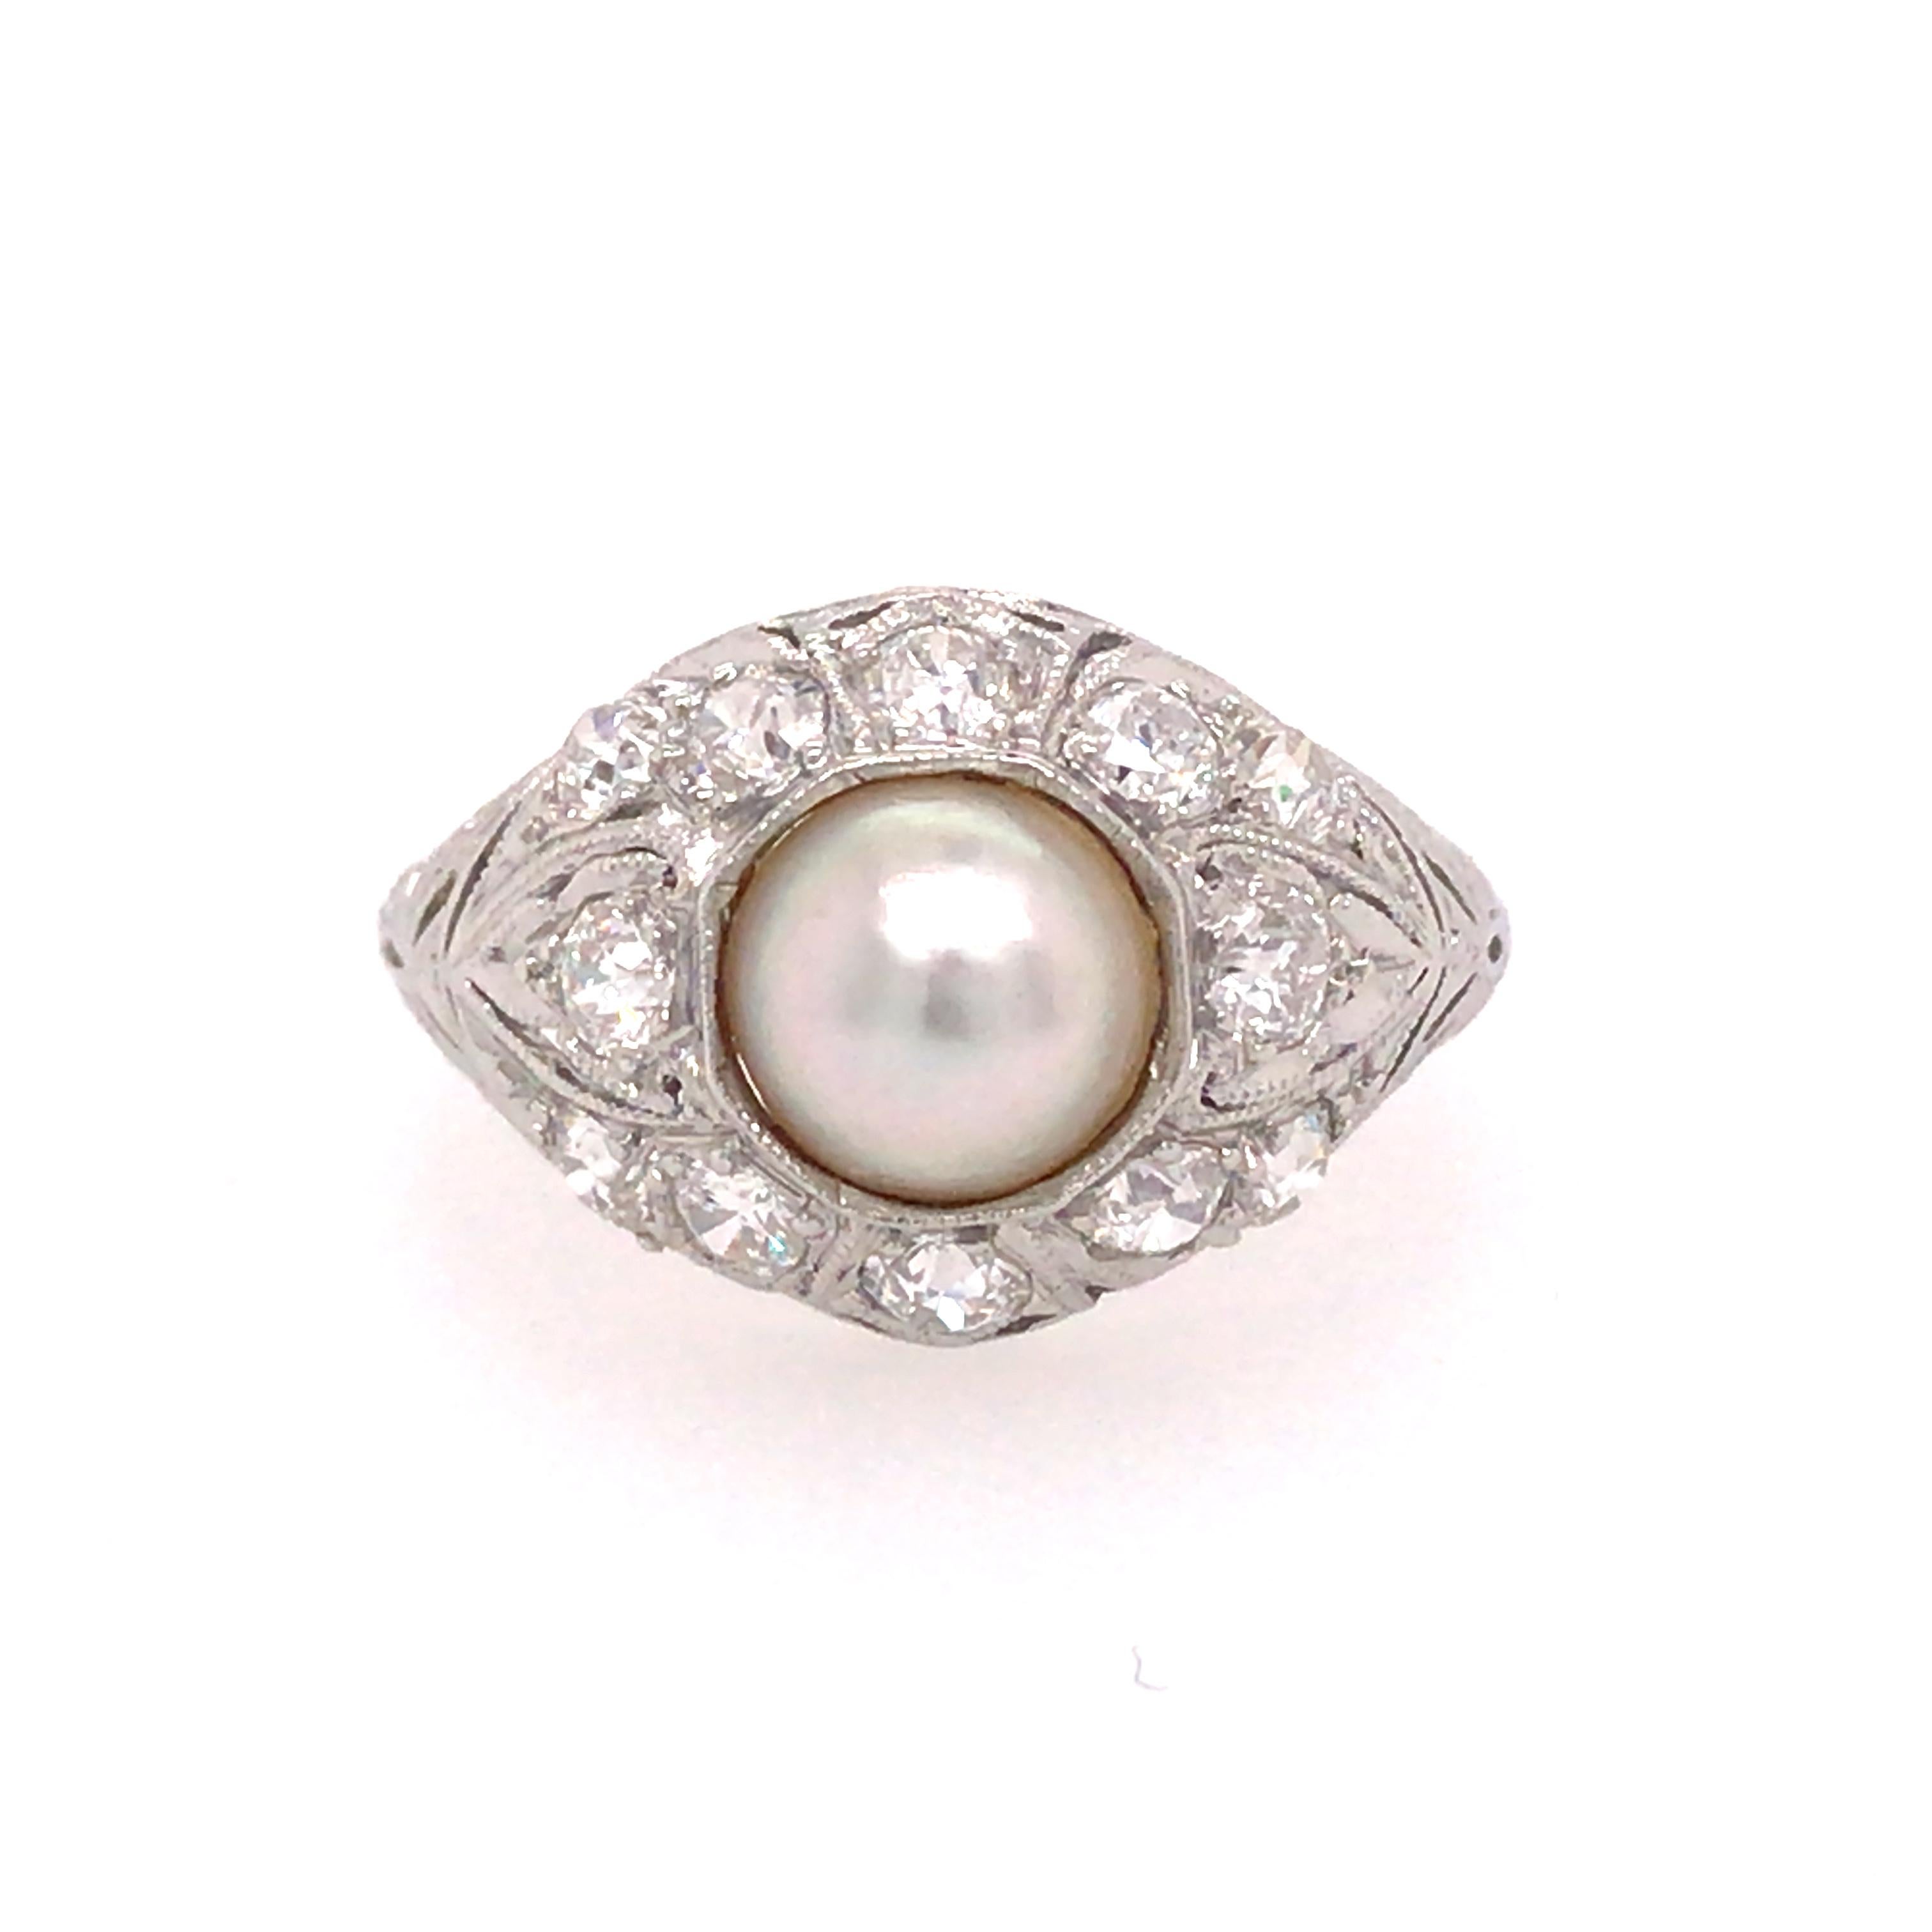 Art Deco Pearl Diamond Ring in Platinum.  Round Brilliant Cut Diamonds weighing 0.72 carat total weight, G-H in color and VS in clarity are expertly set around the Round White Pearl.  The Ring measures 1/2 inch in width.  Ring size 4. 3.88 grams. 